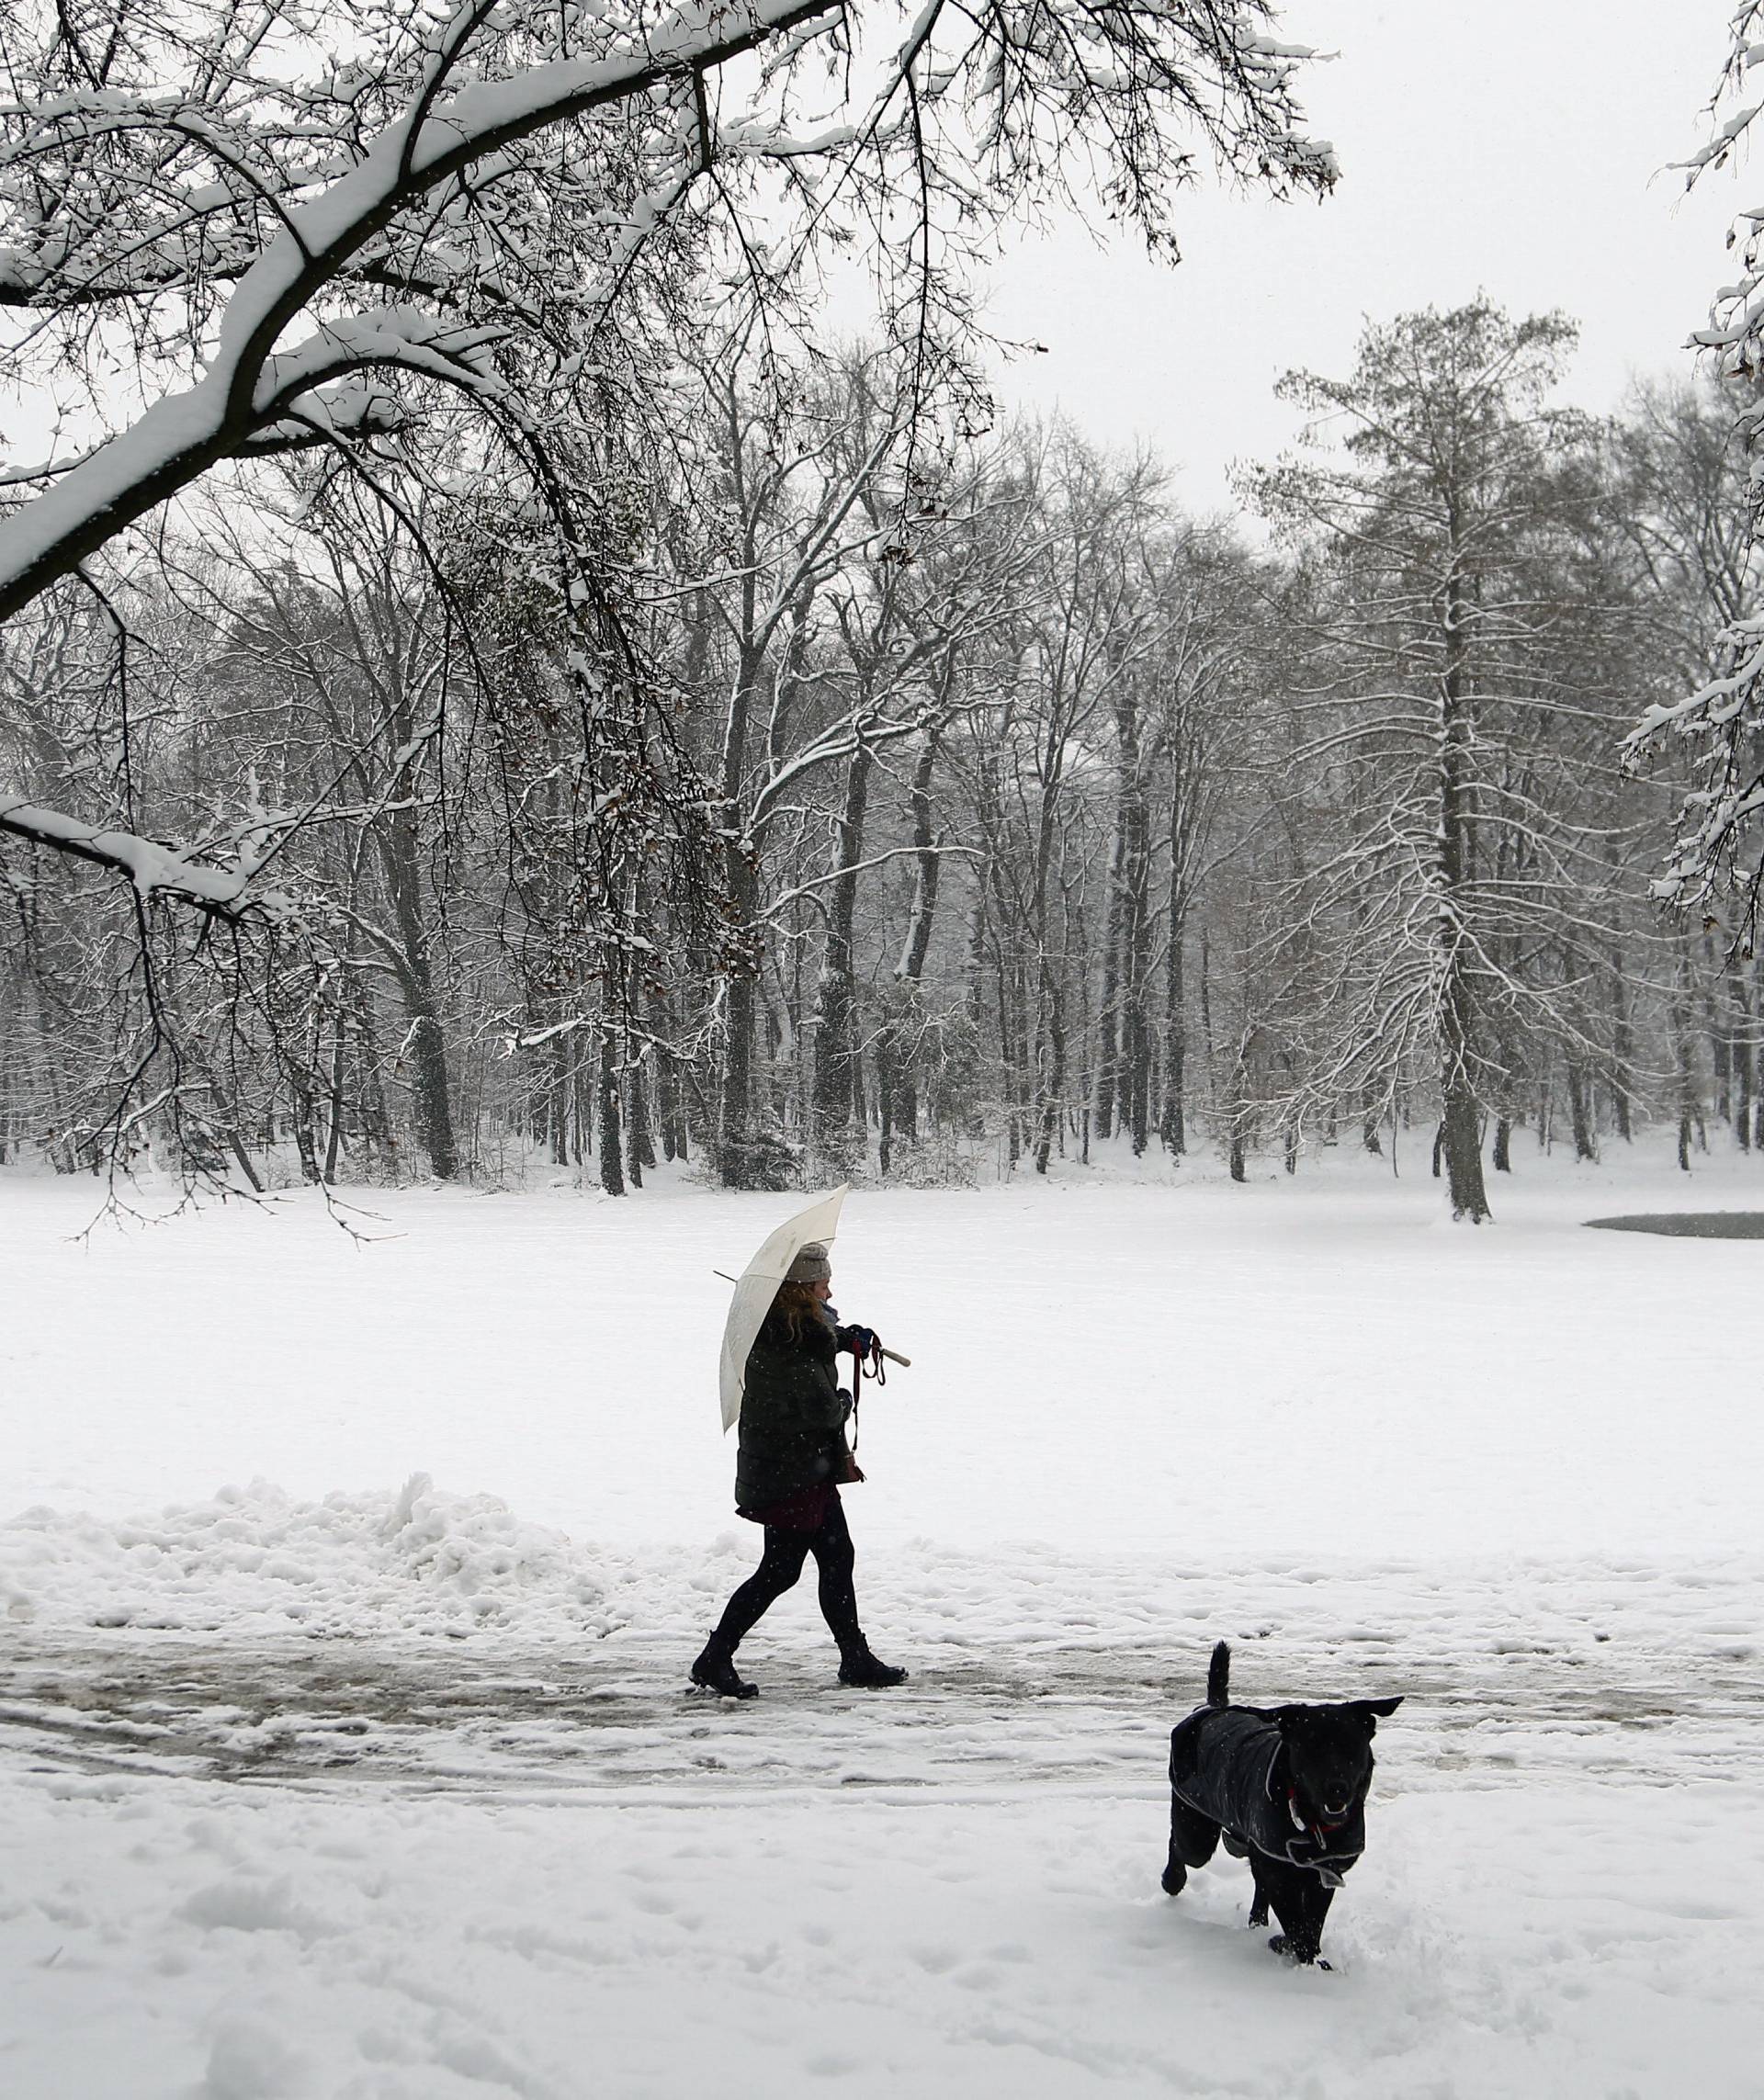 A woman walks with a dog under the falling snow in Zagreb's park Maksimir